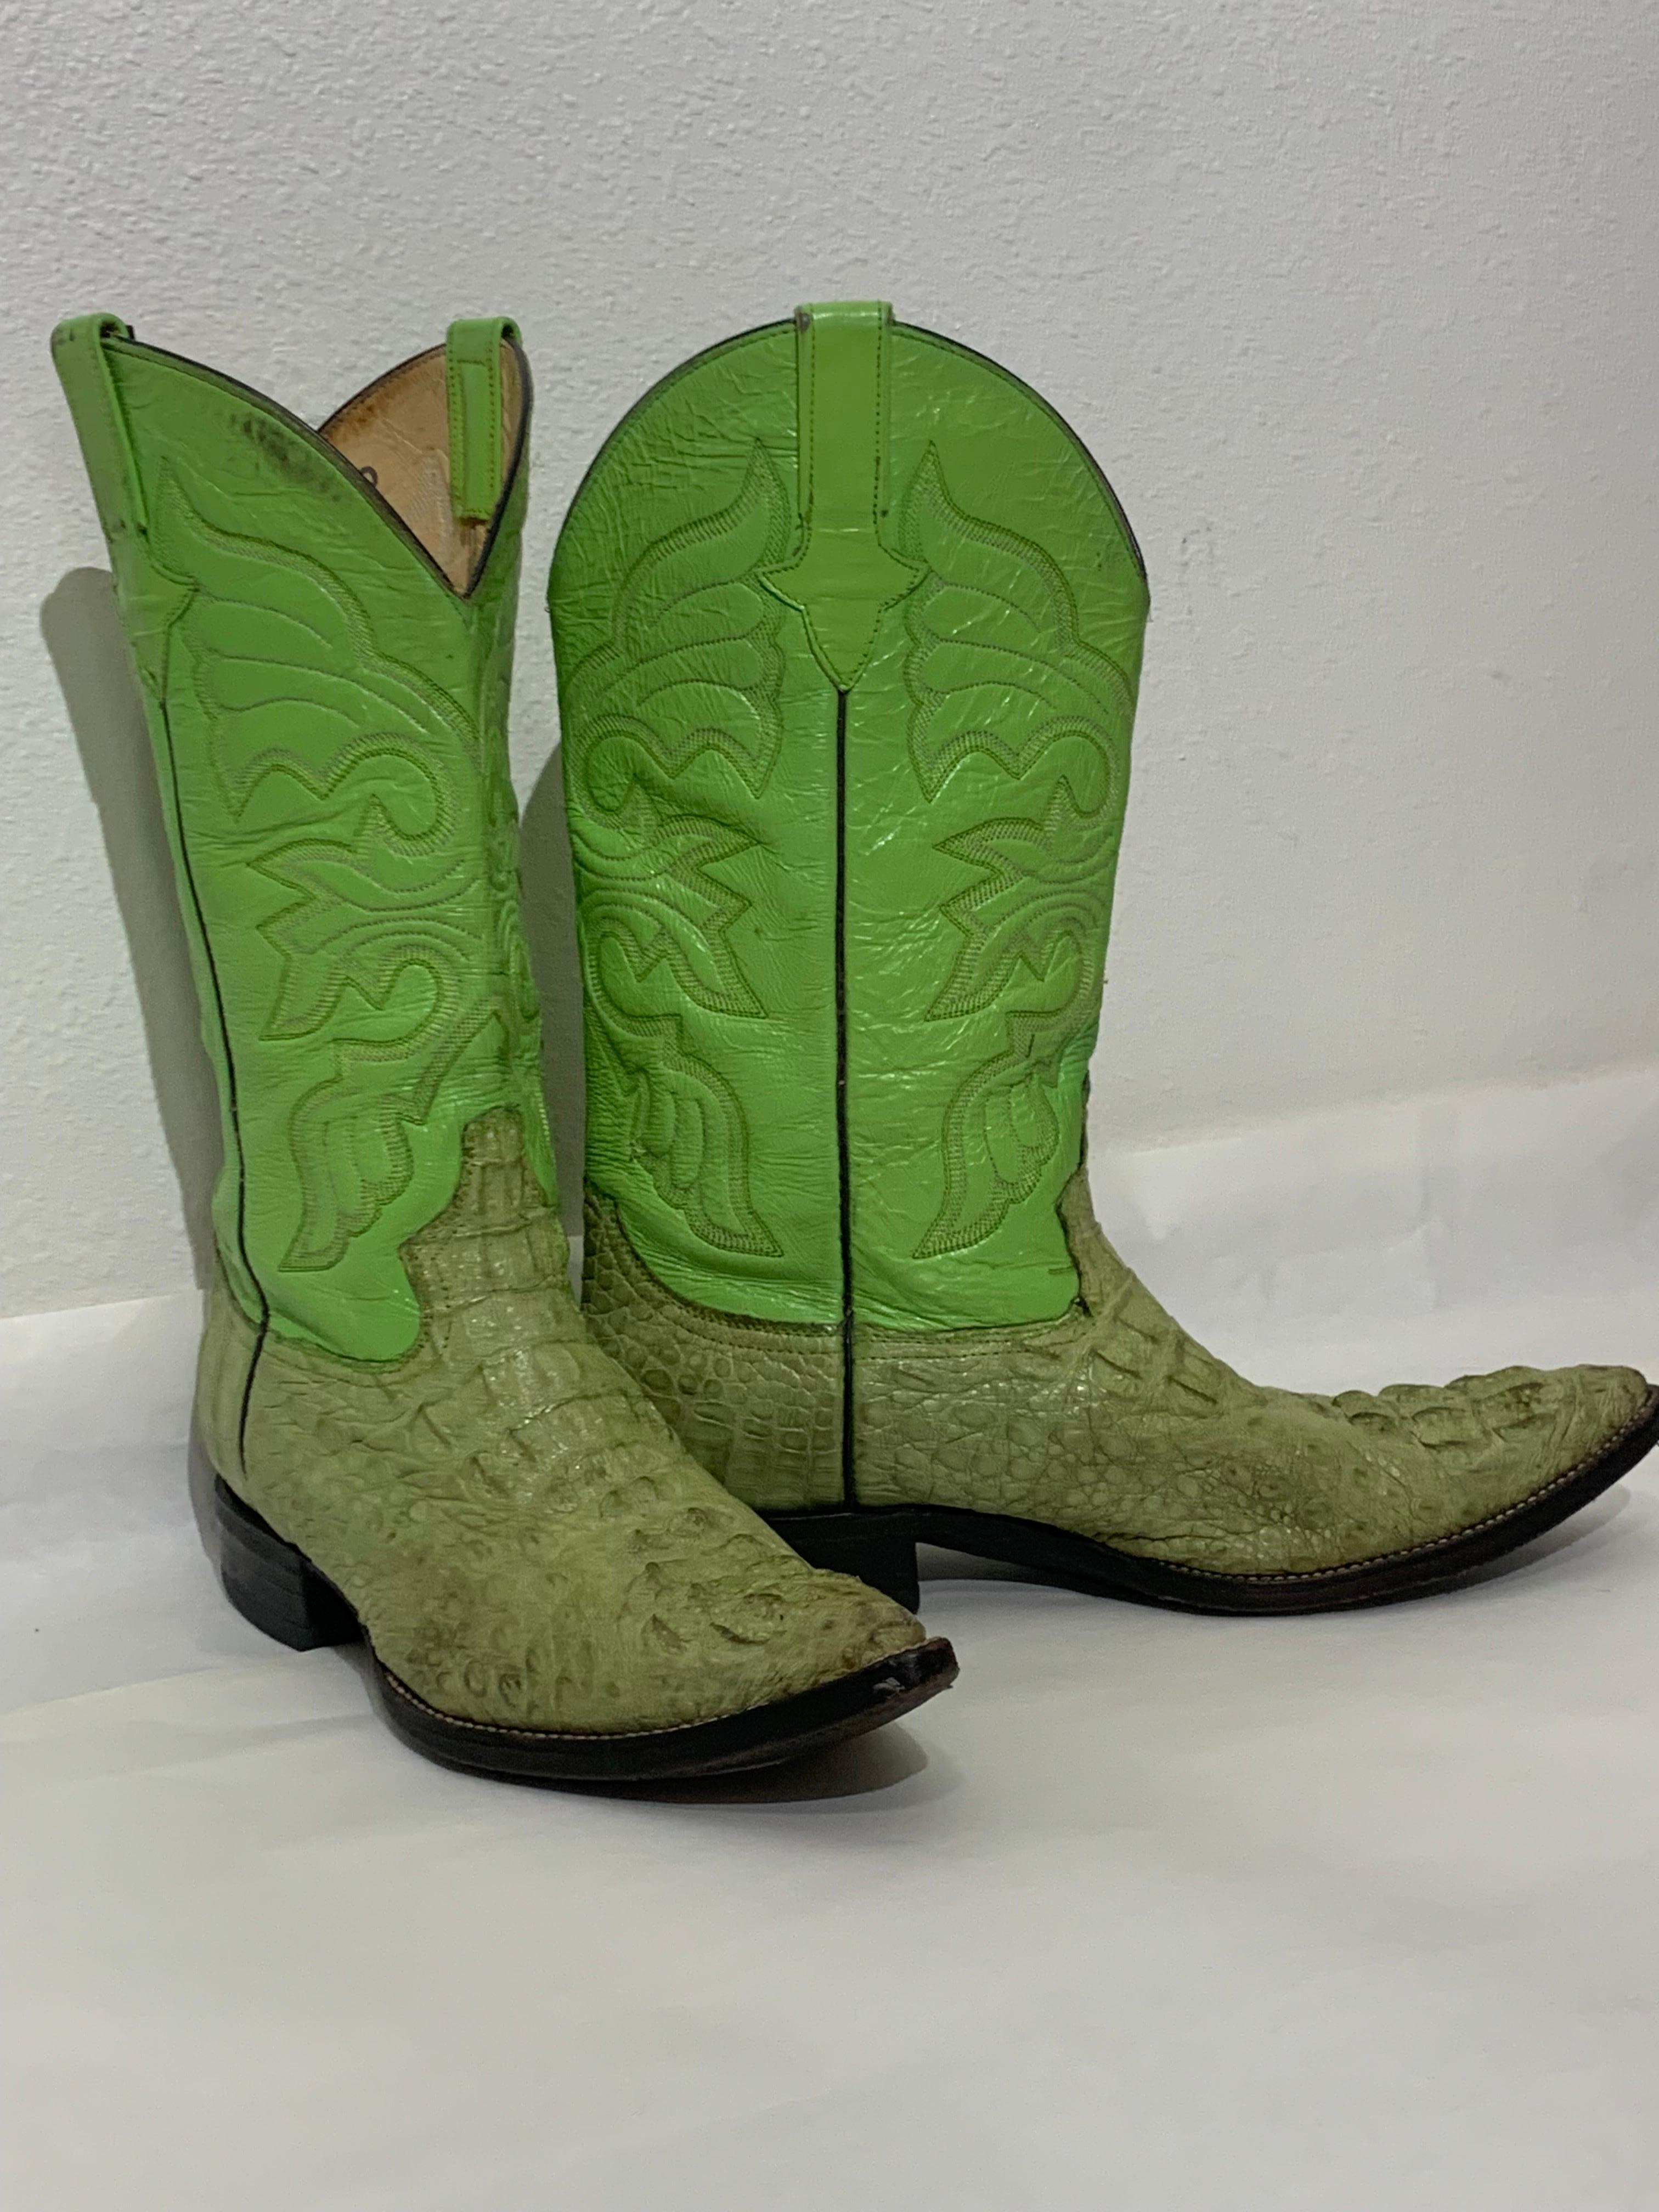 Gecko Green Leather & Crocodile Western Cowboy Boots US Size 8: Hemisferio brand leather boots with Western-stitched uppers and extreme scaled crocodile skin vamps. Low heel, black leather soles and pointed toes. US Men's Size 8. 